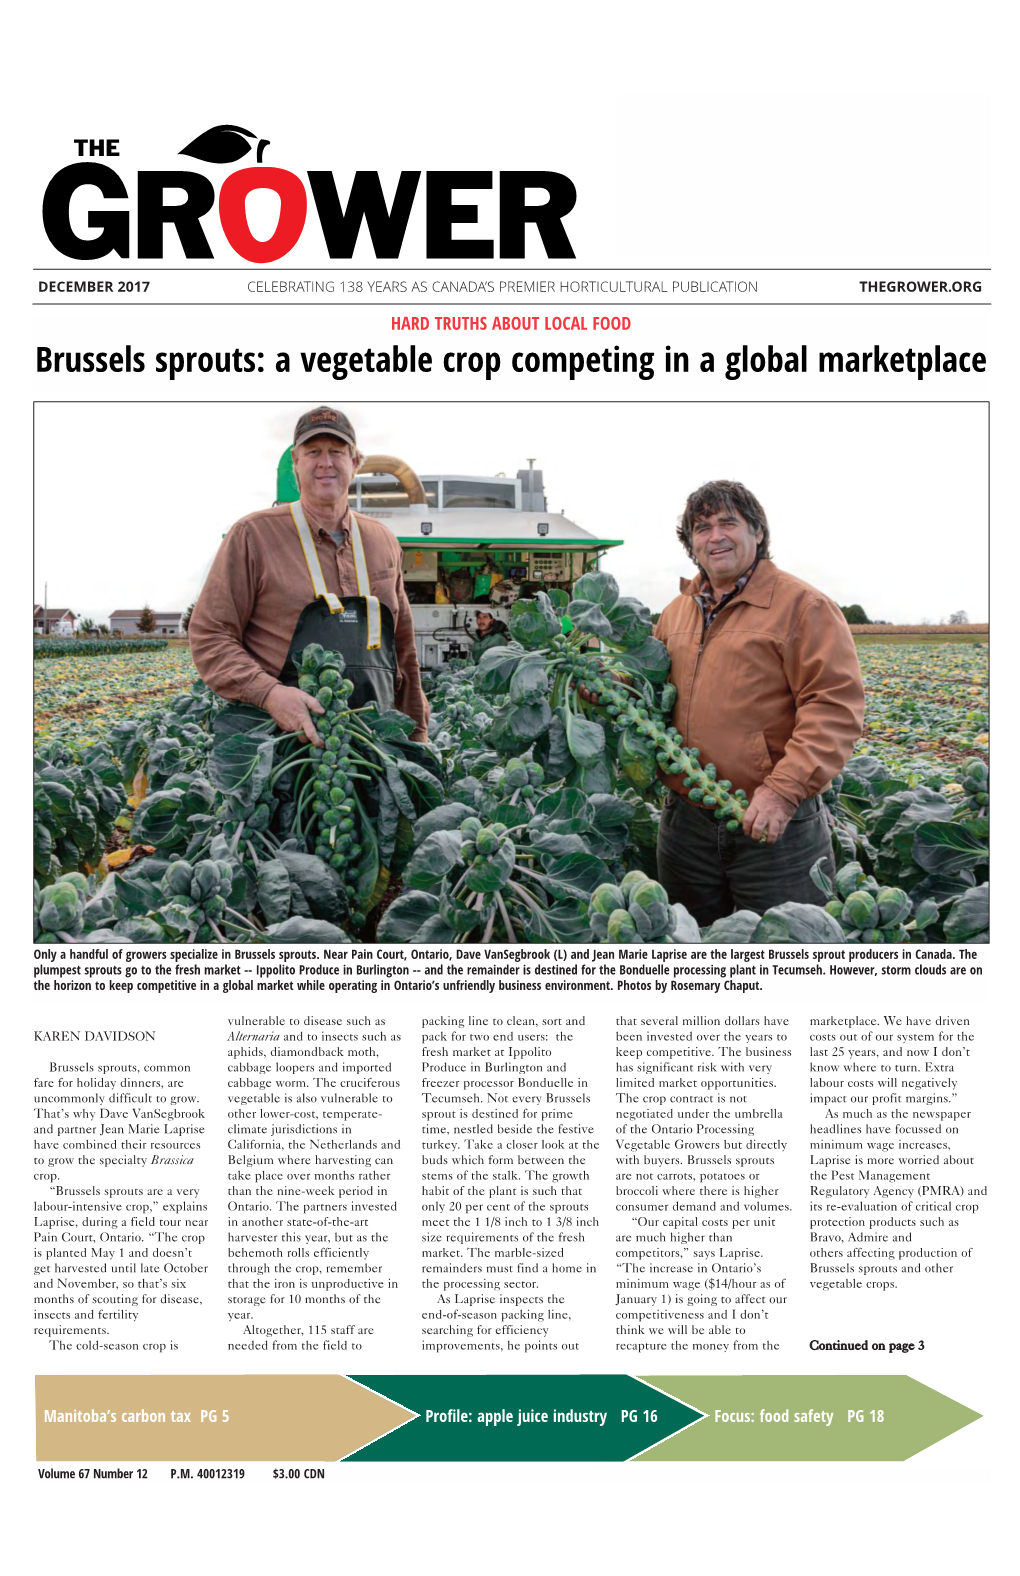 Brussels Sprouts: a Vegetable Crop Competing in a Global Marketplace